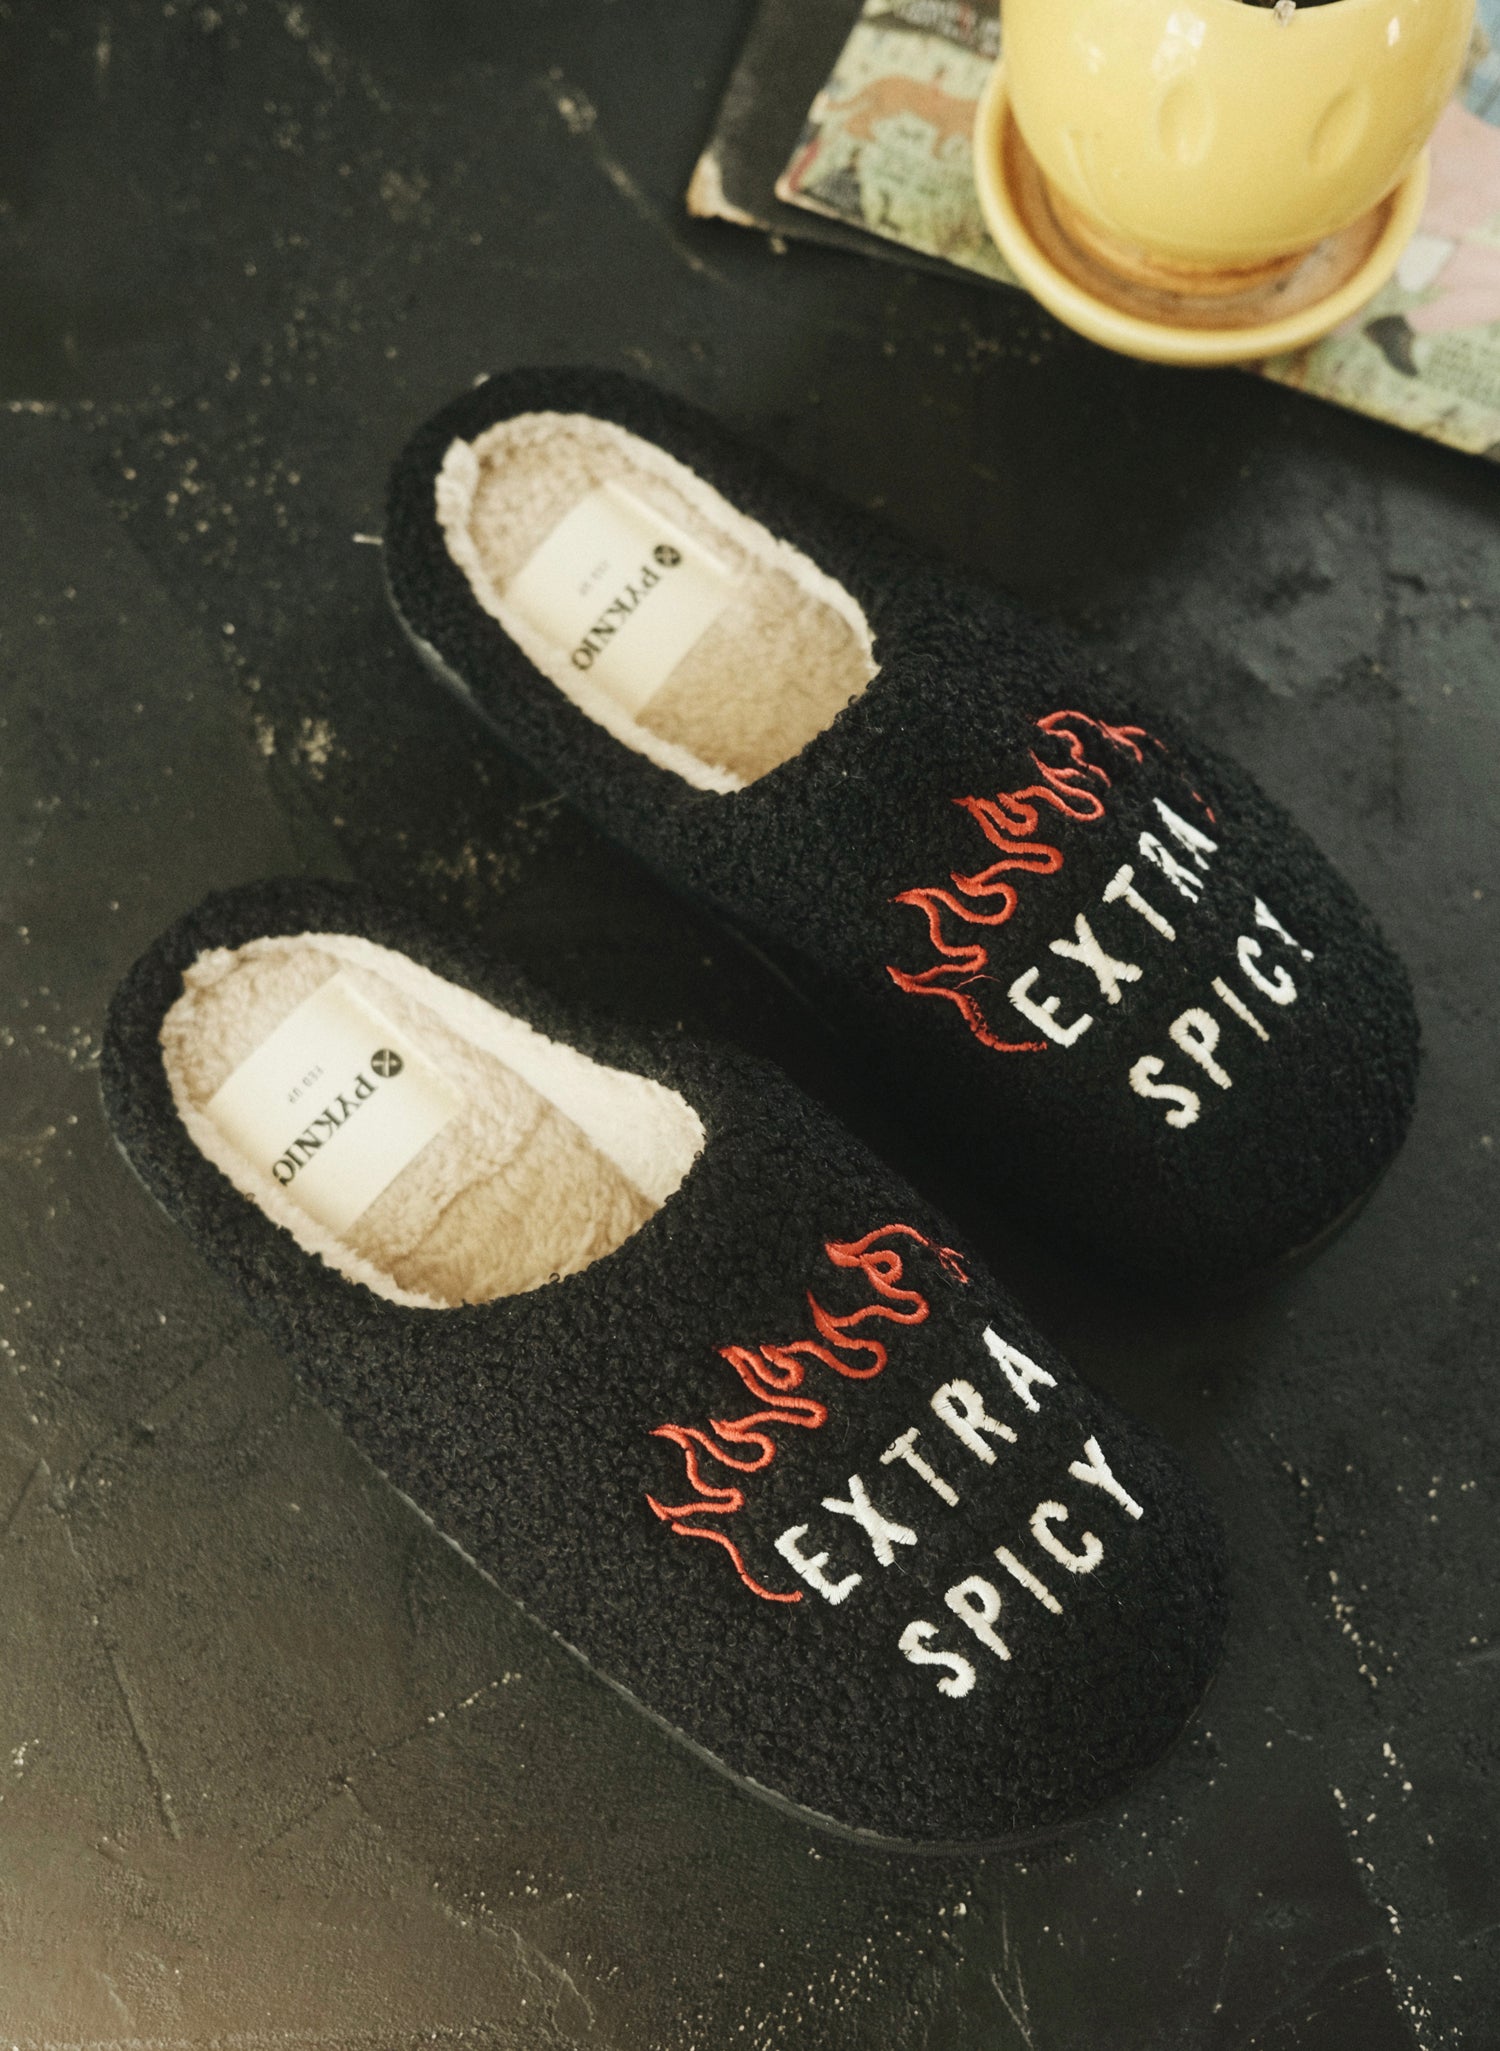 Extra Spicy Slippers